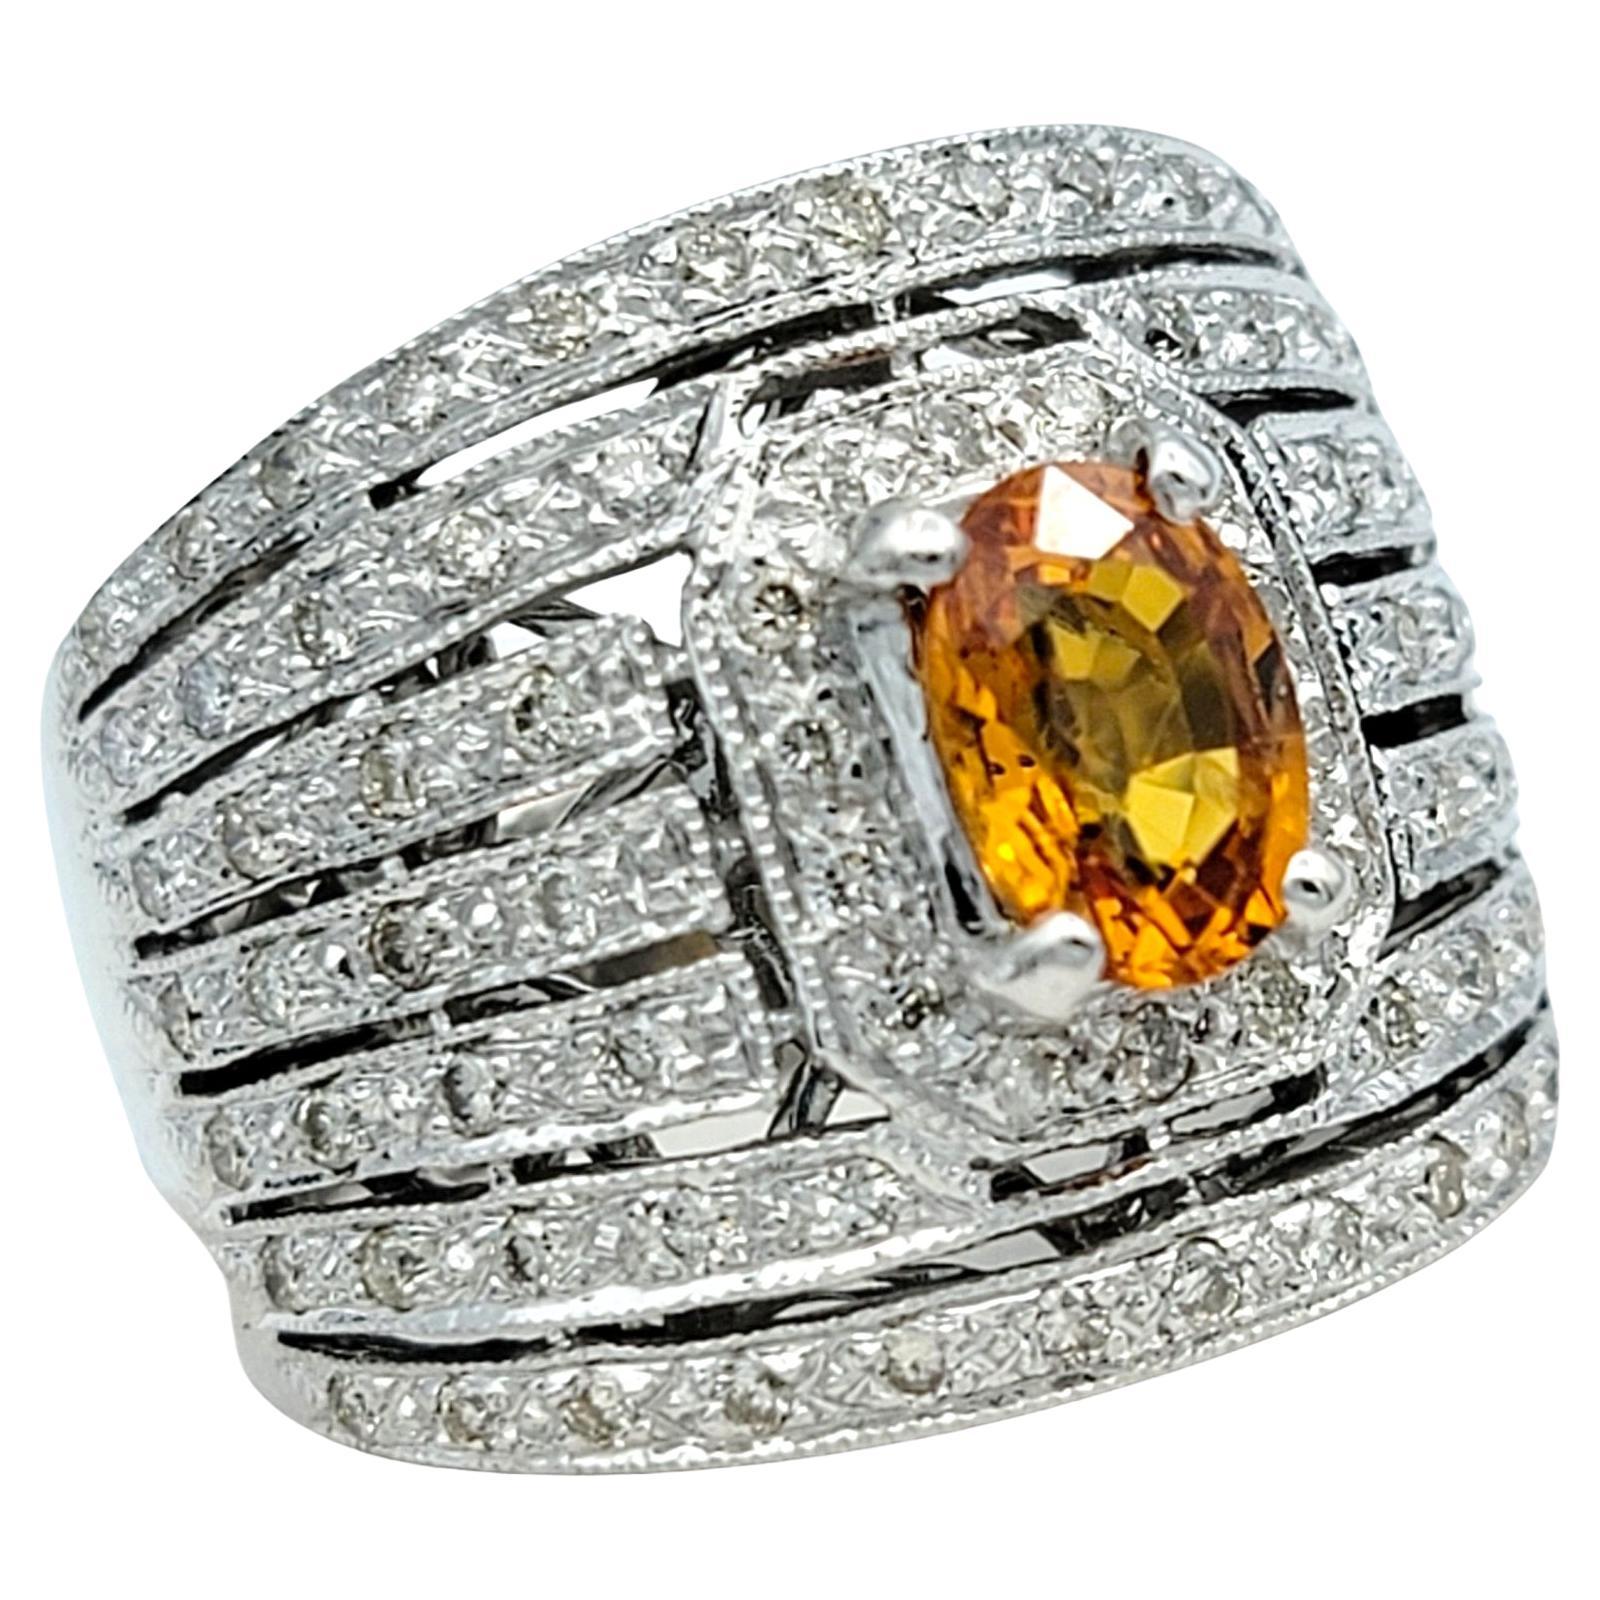 Ring Size: 5

This 14 karat white gold ring exudes timeless elegance with its oval orange sapphire centerpiece and 7 surrounding rows of dazzling diamonds. The warm hue of the sapphire contrasts beautifully with the icy brilliance of the diamonds,